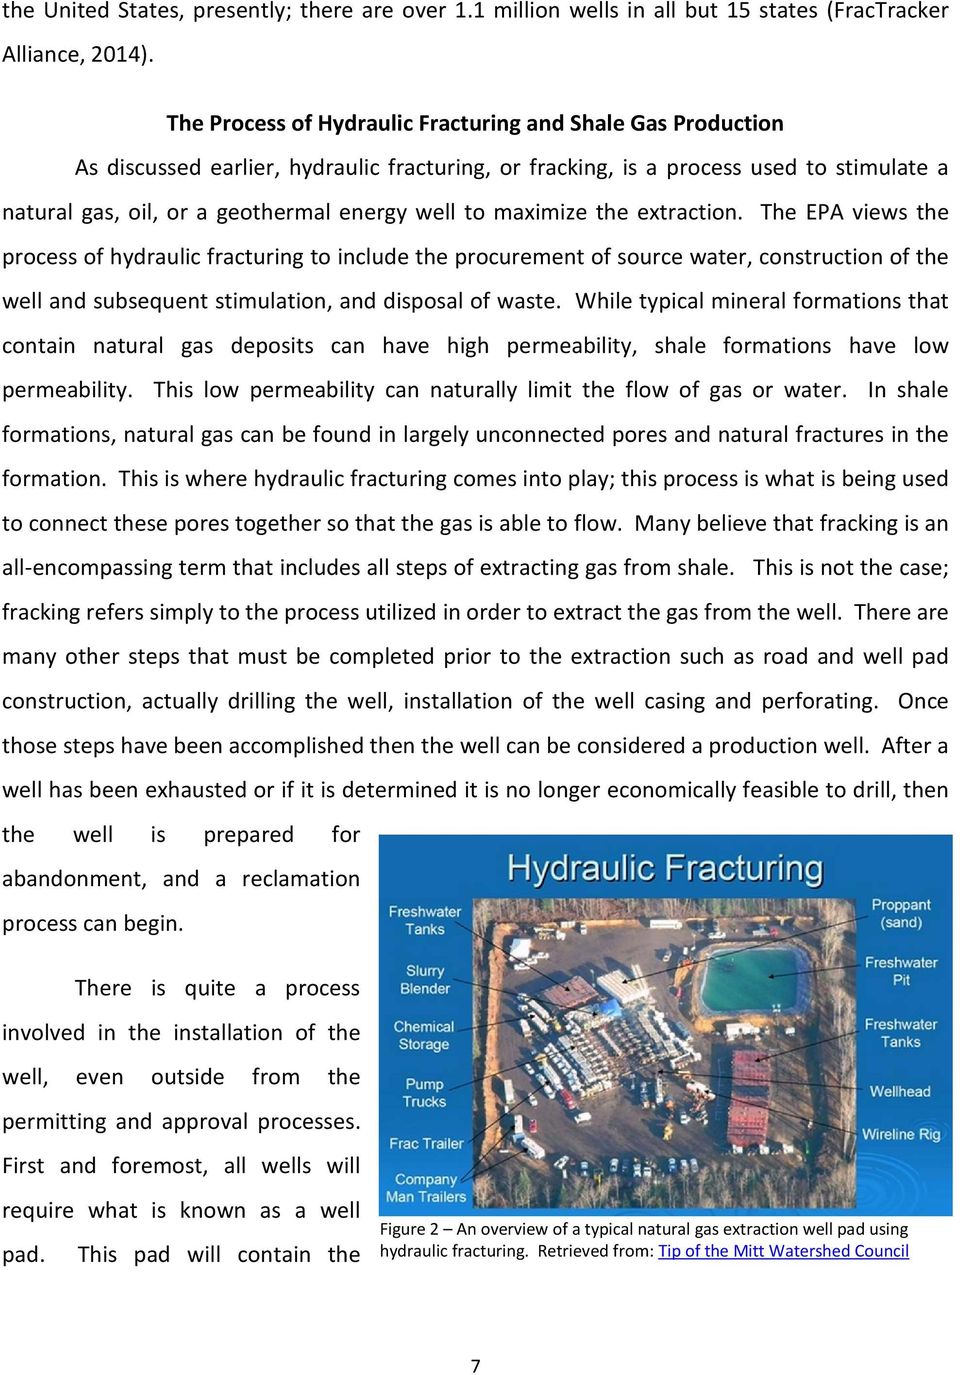 maximize the extraction. The EPA views the process of hydraulic fracturing to include the procurement of source water, construction of the well and subsequent stimulation, and disposal of waste.